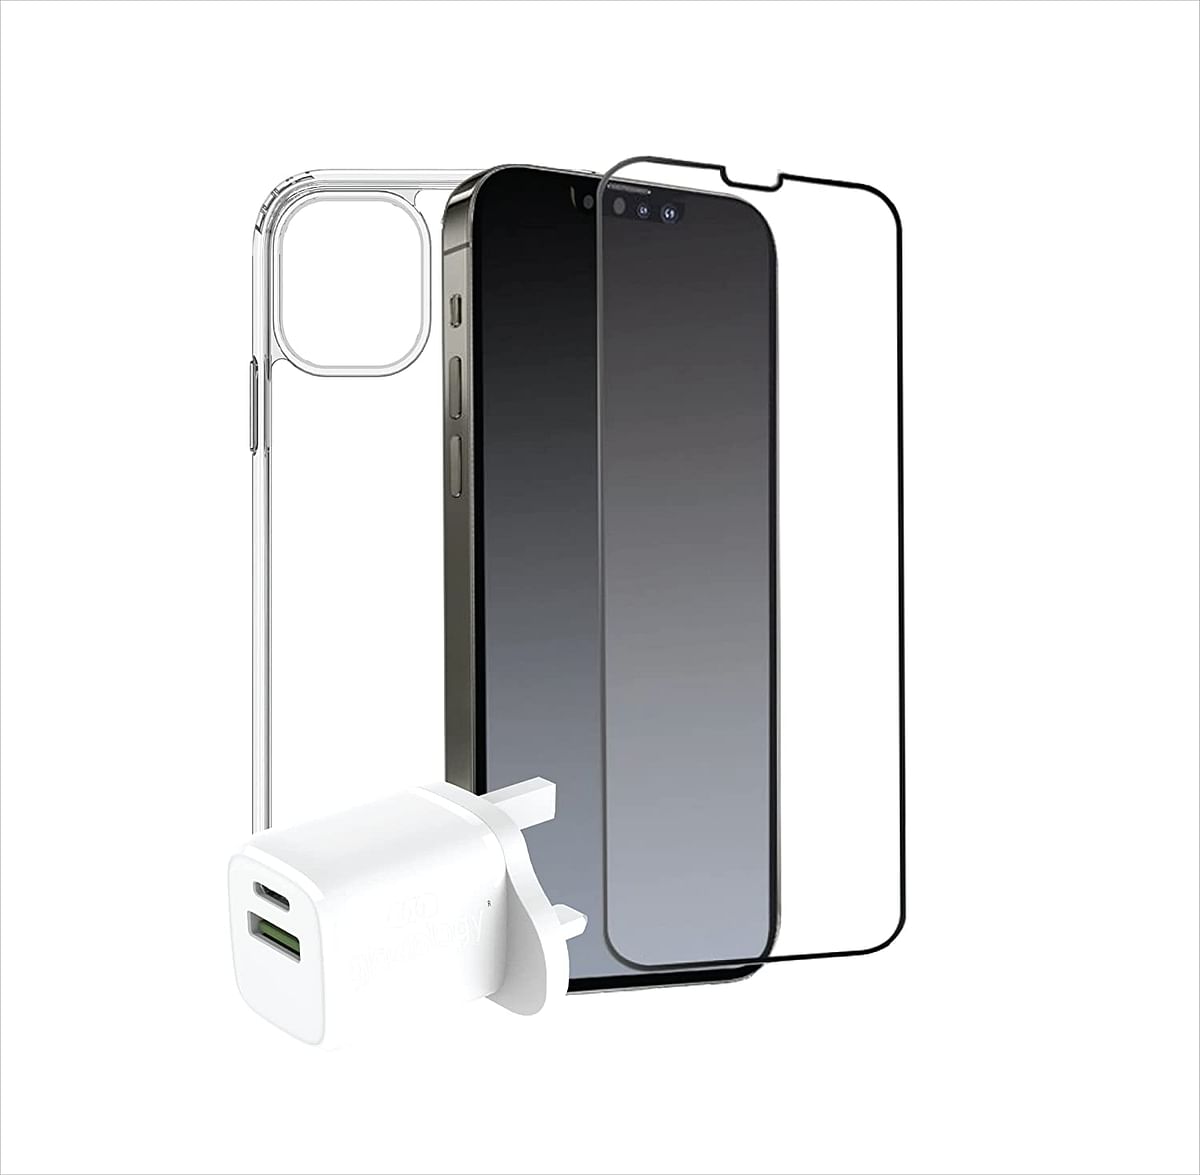 Glassology 4 in 1 iPhone 14 Pro Max Clear Screen Protector Case Lens Guard & Wall Adapter White